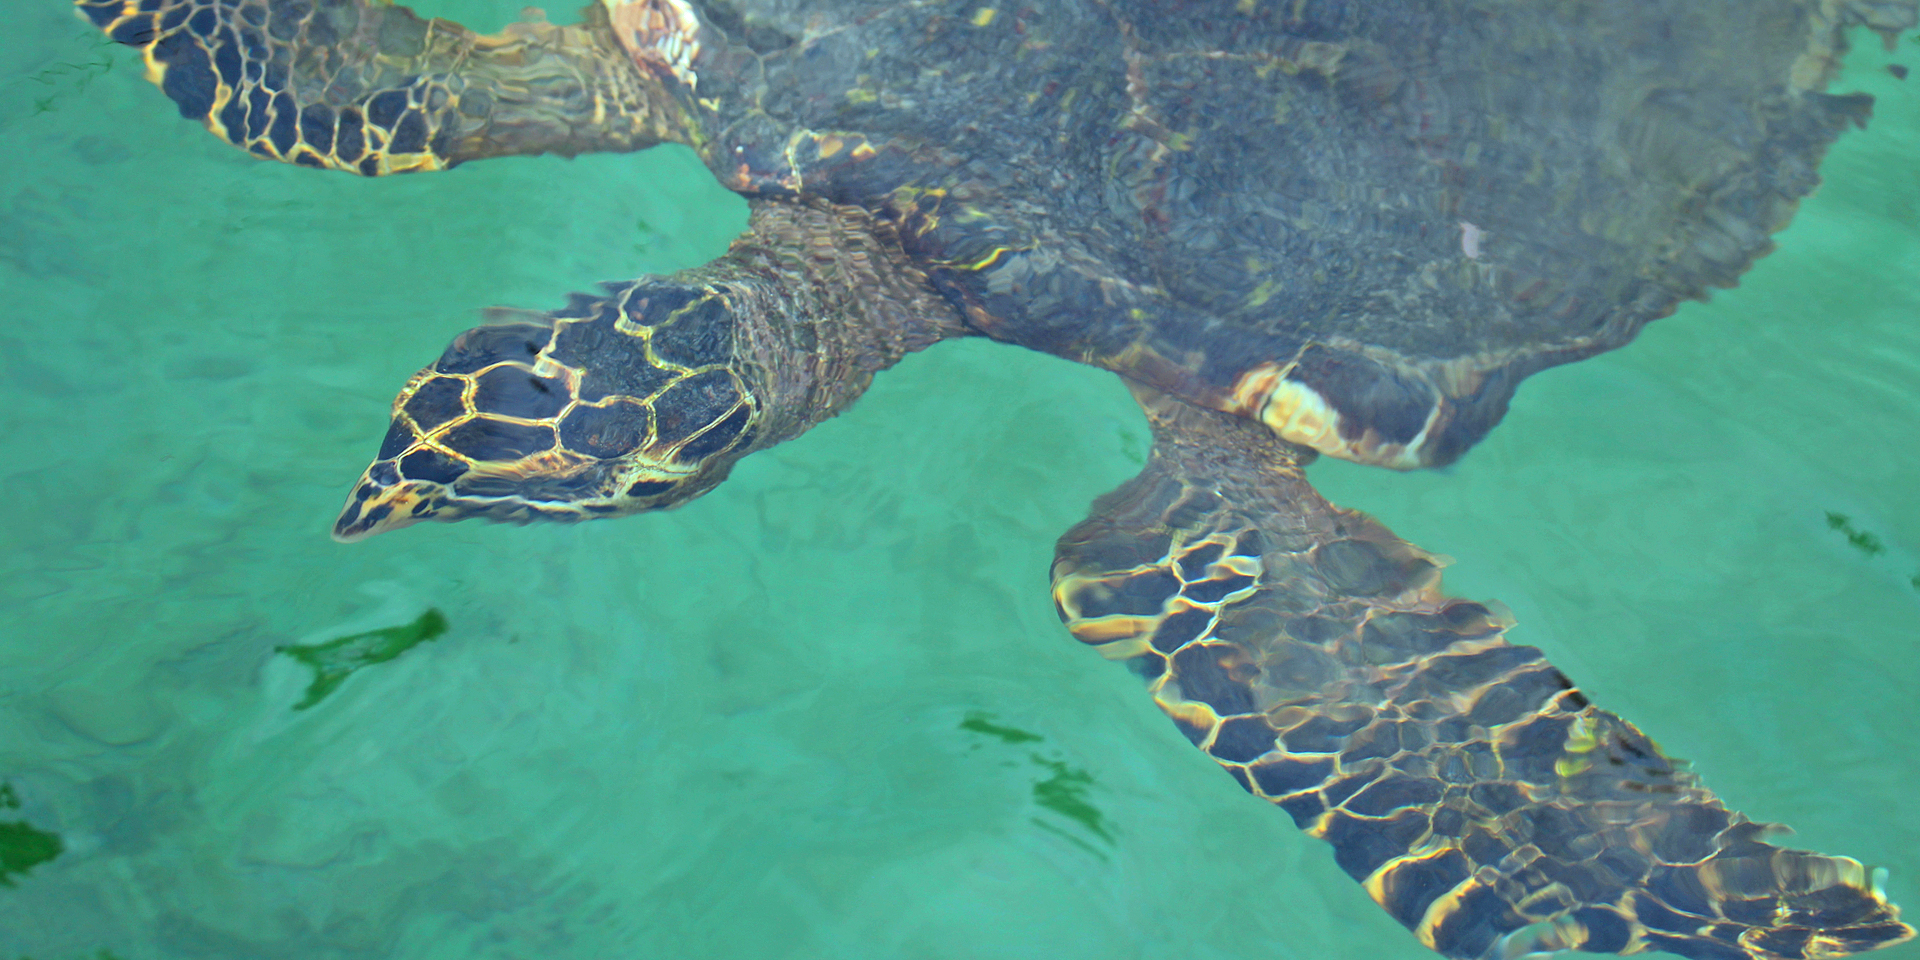 A close-up image of a sea turtle in turquoise colored water.